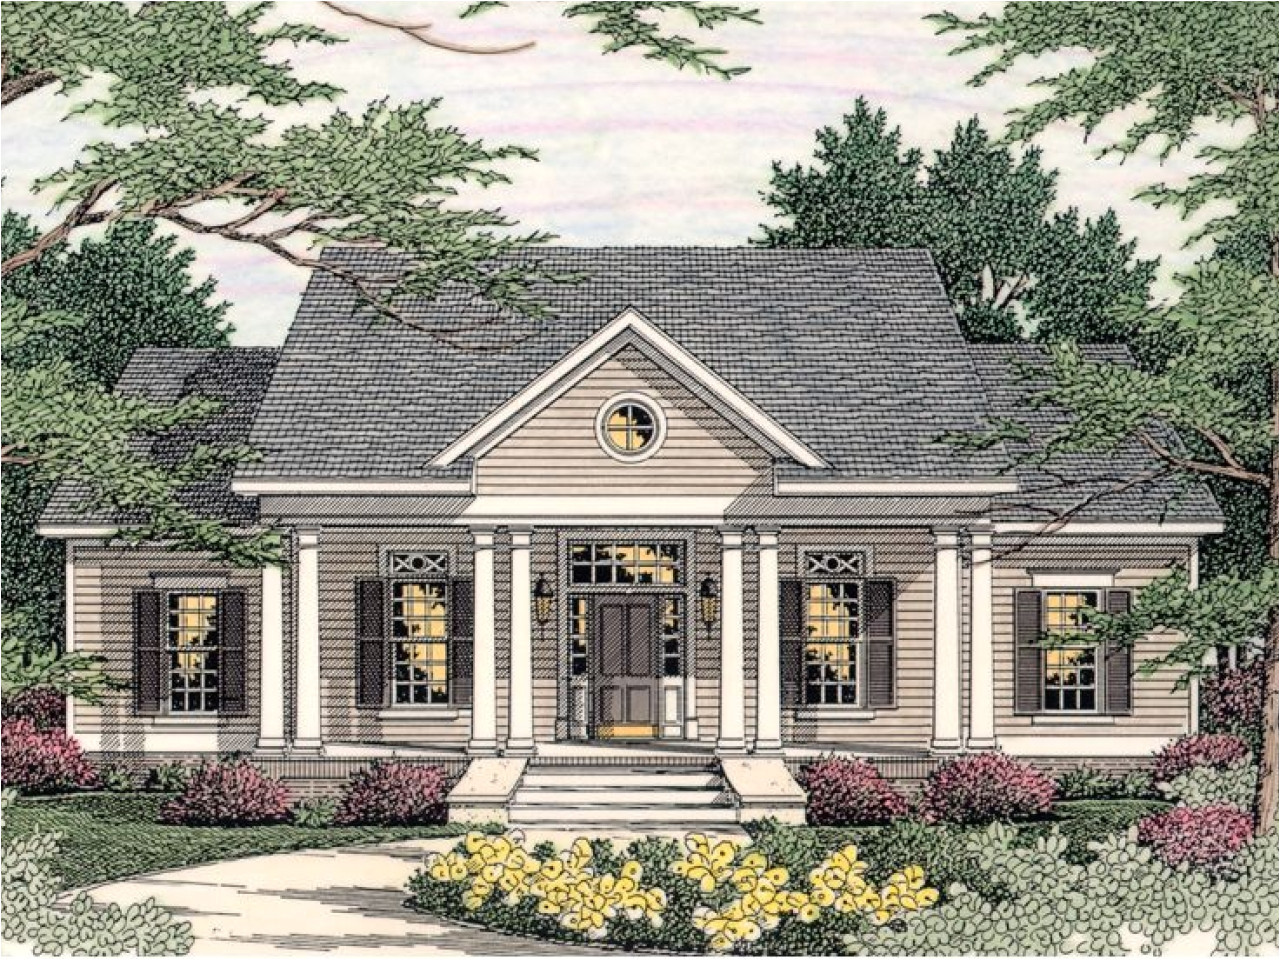 Small southern Home Plans Small southern Colonial House Plans Colonial Style Homes